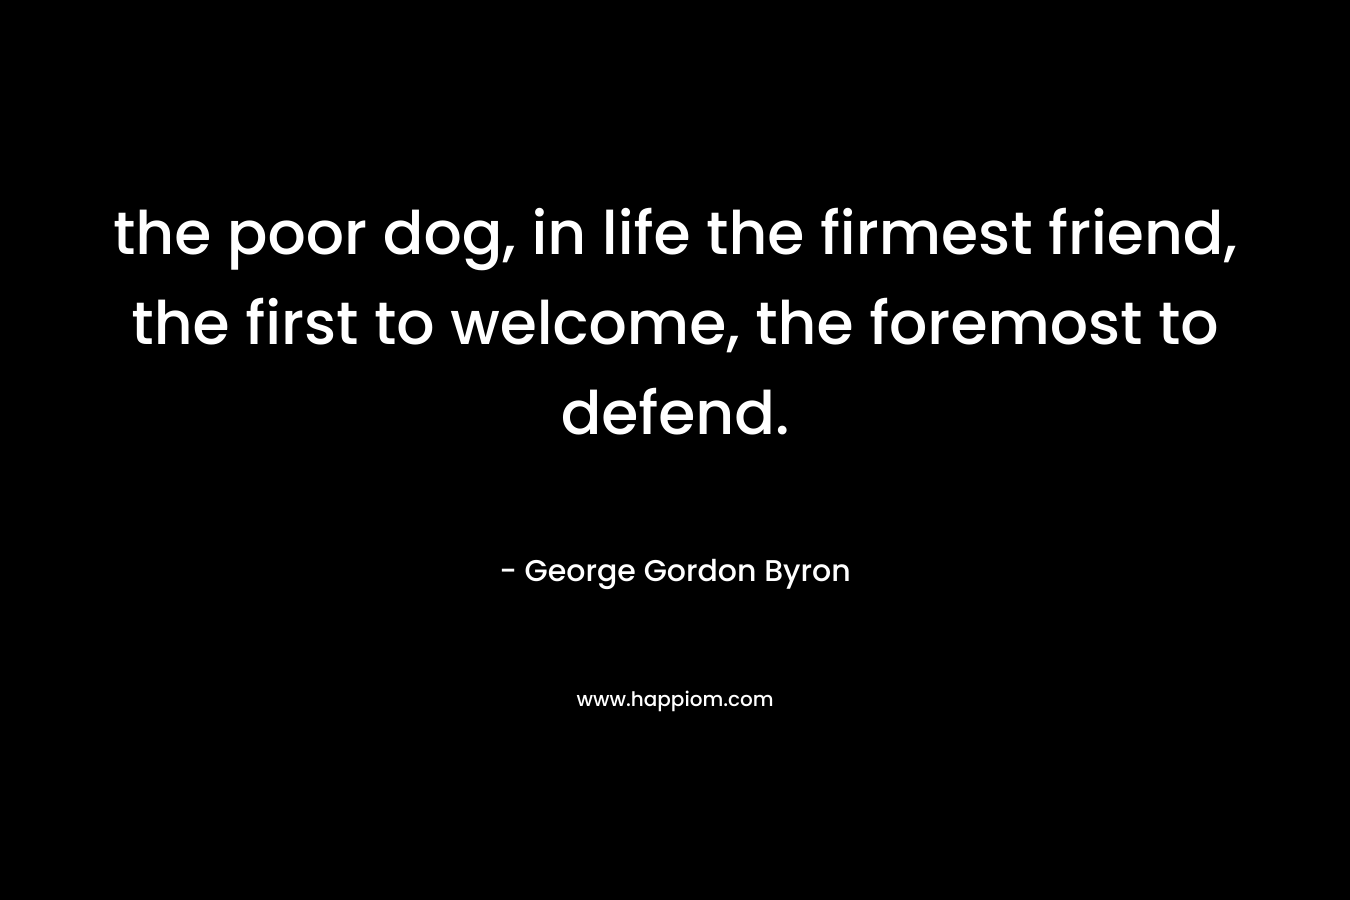 the poor dog, in life the firmest friend, the first to welcome, the foremost to defend.